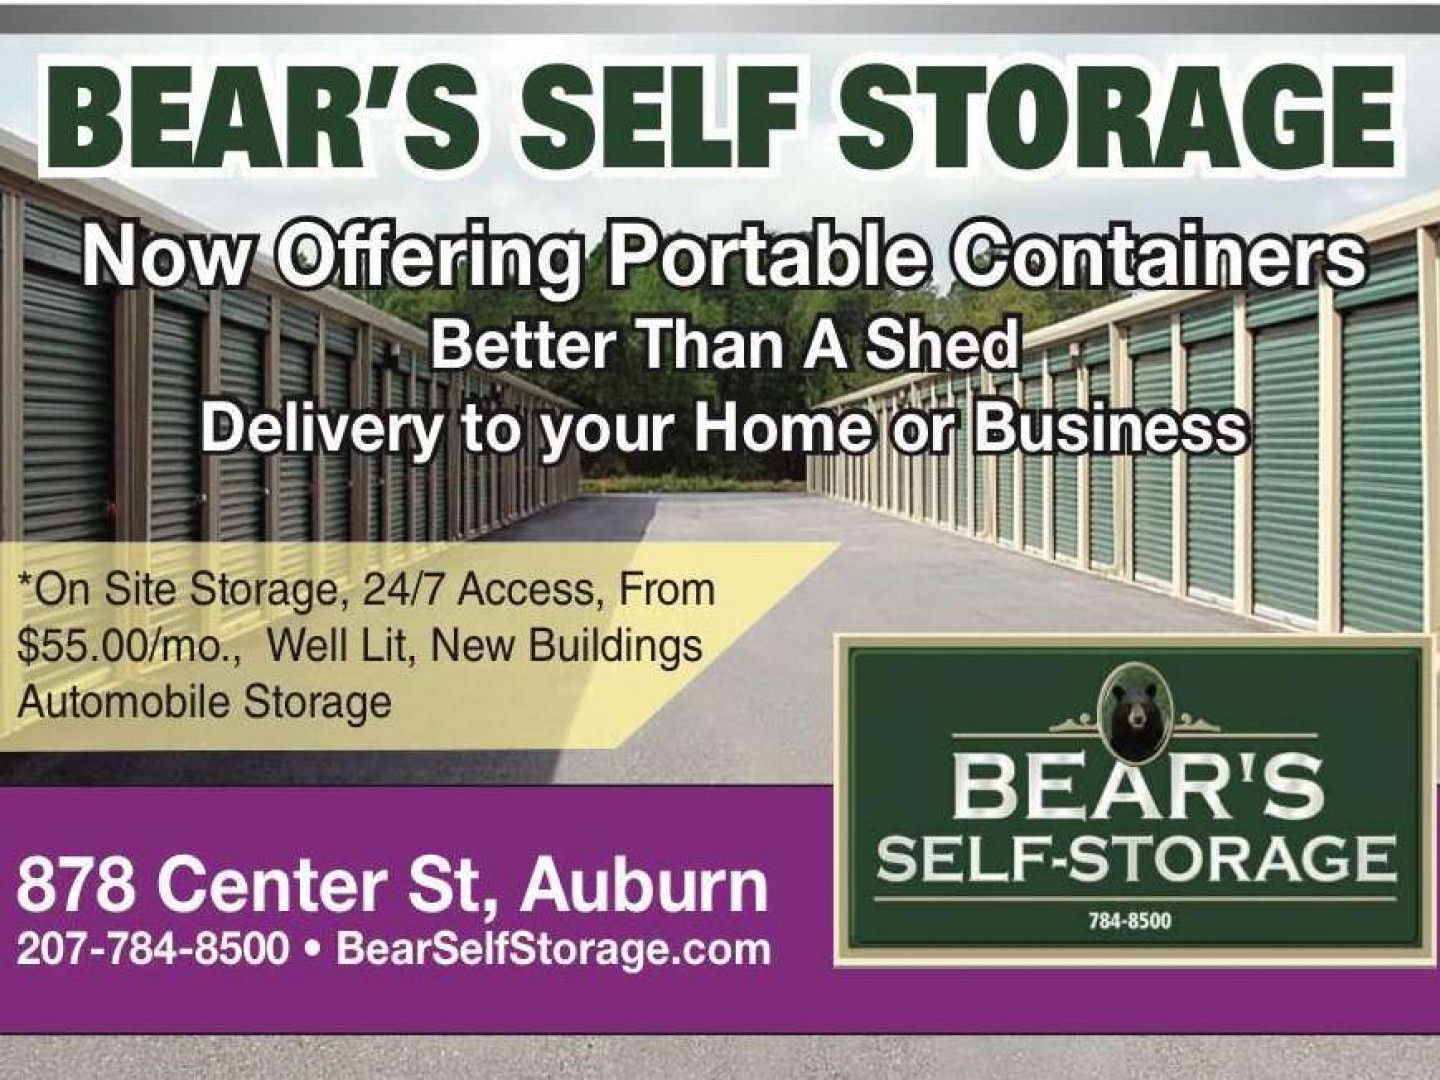 an advertisement for bear's self storage offering portable containers